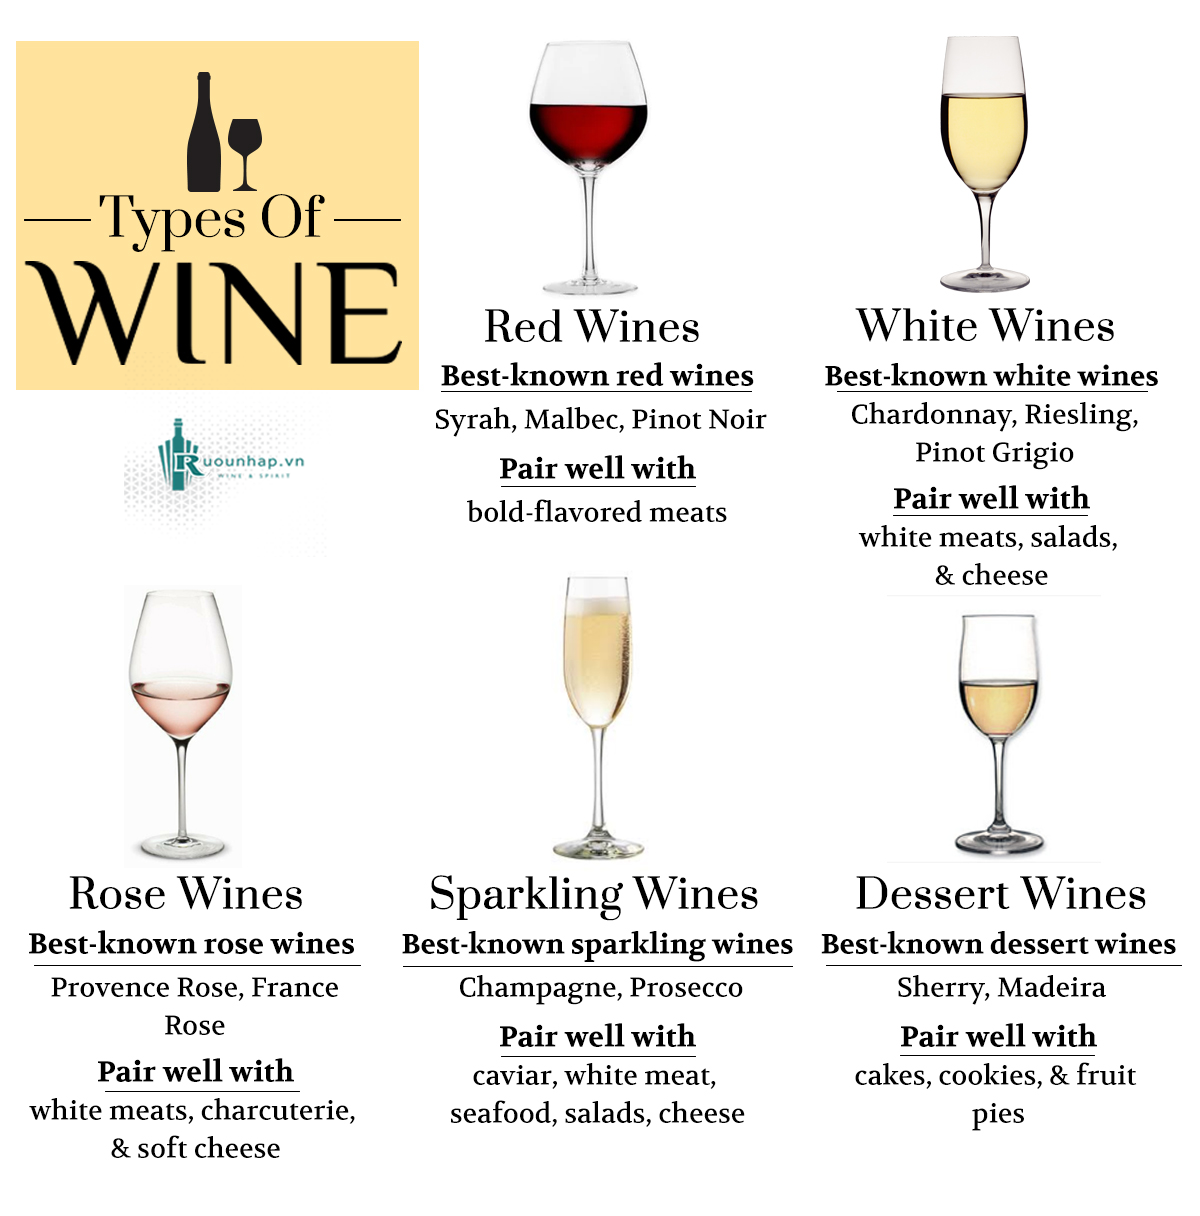 How are the different types of wine?